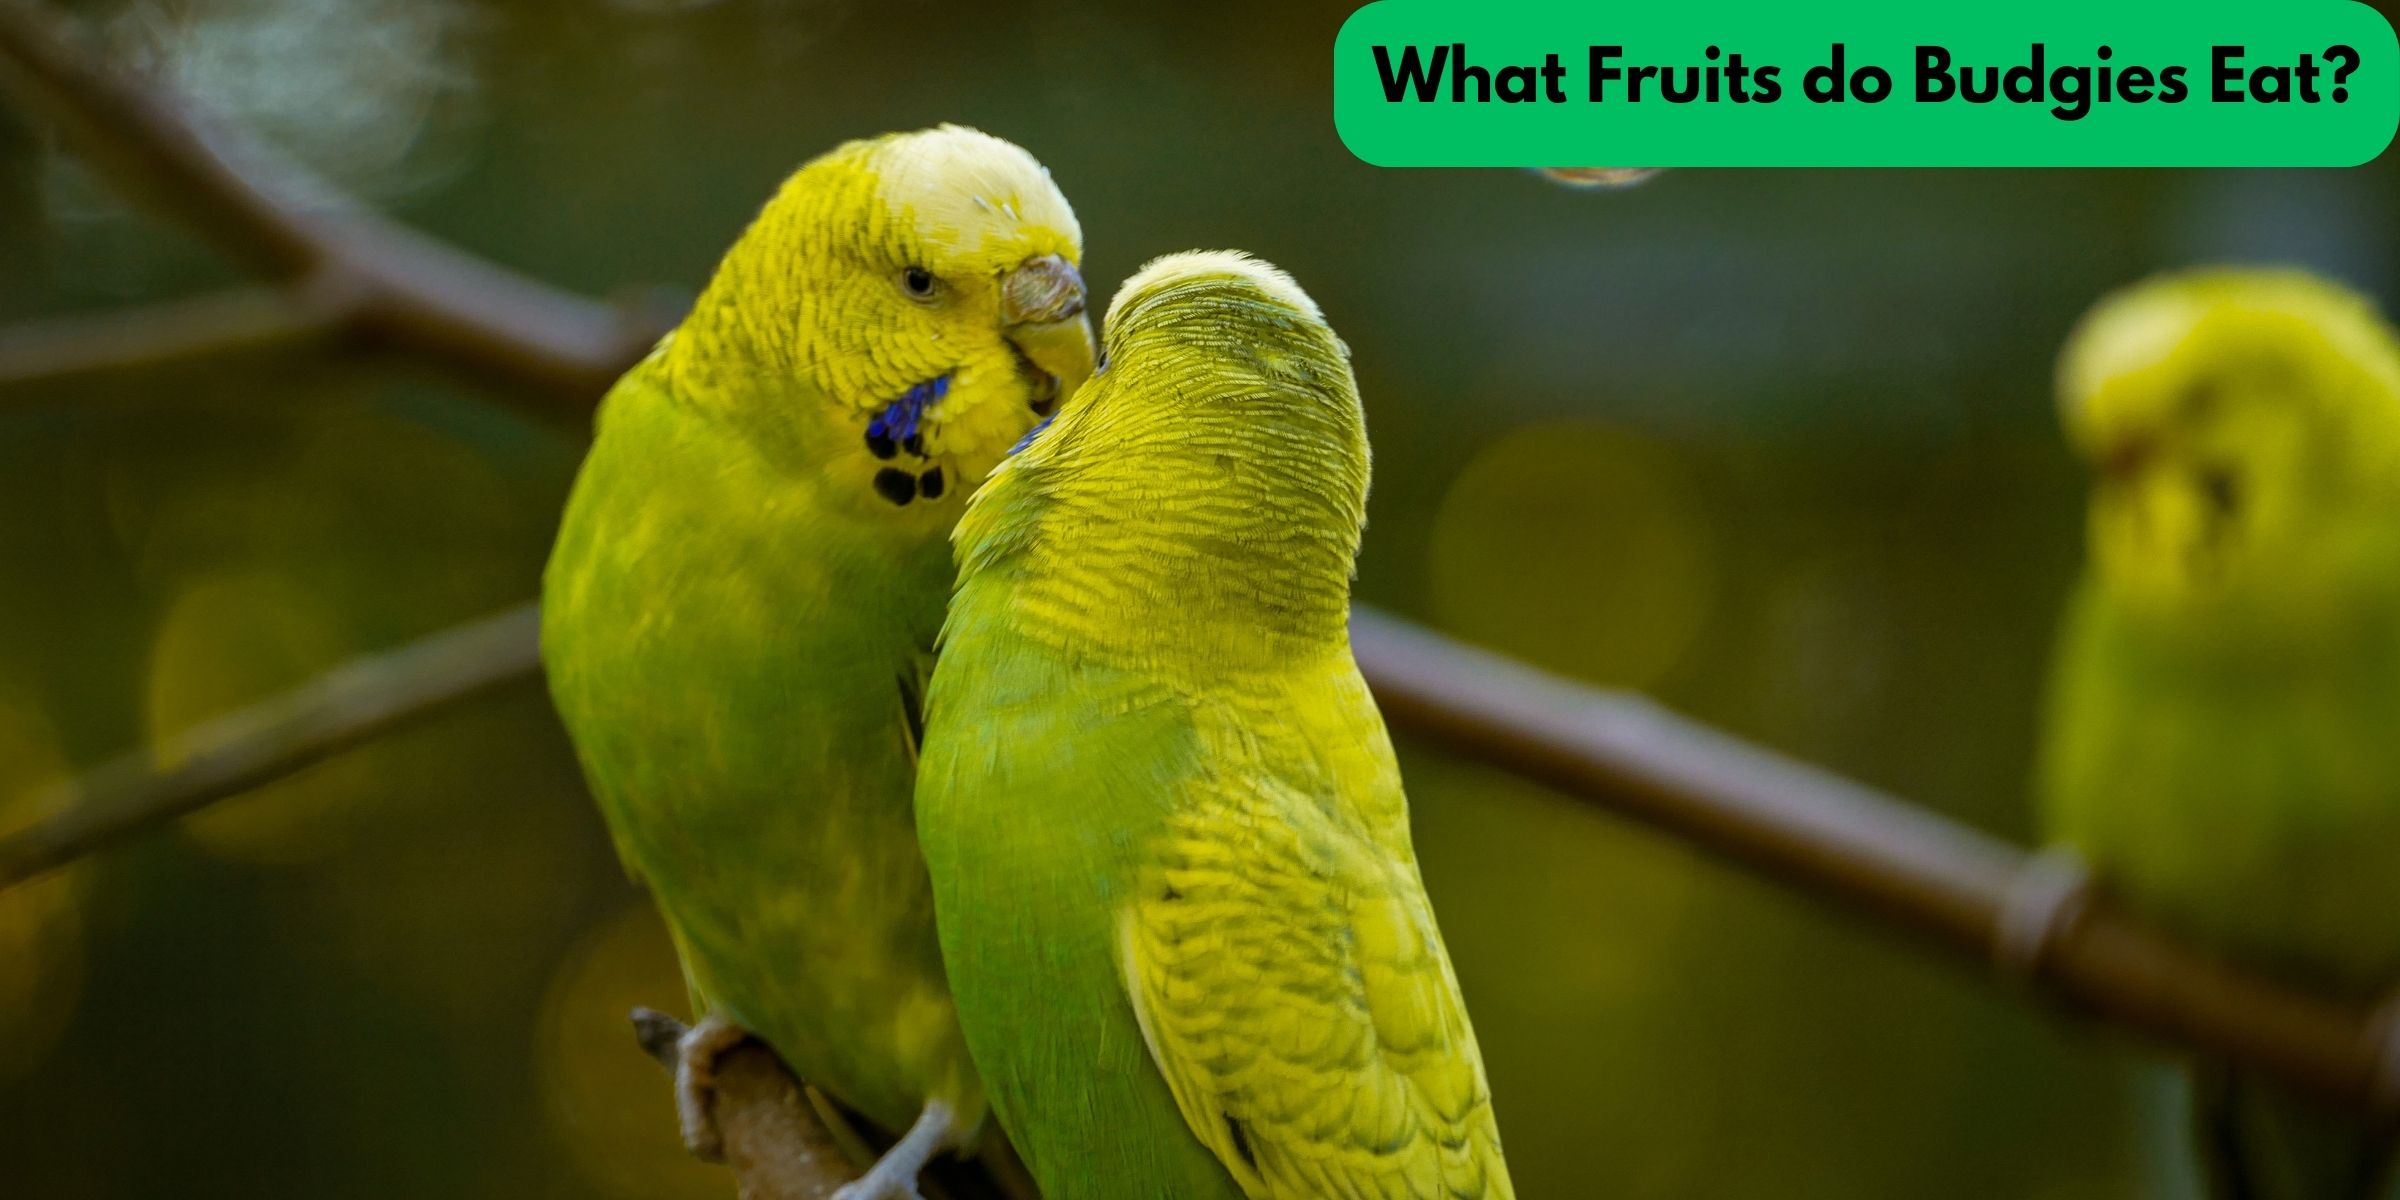 What Fruits do Budgies Eat